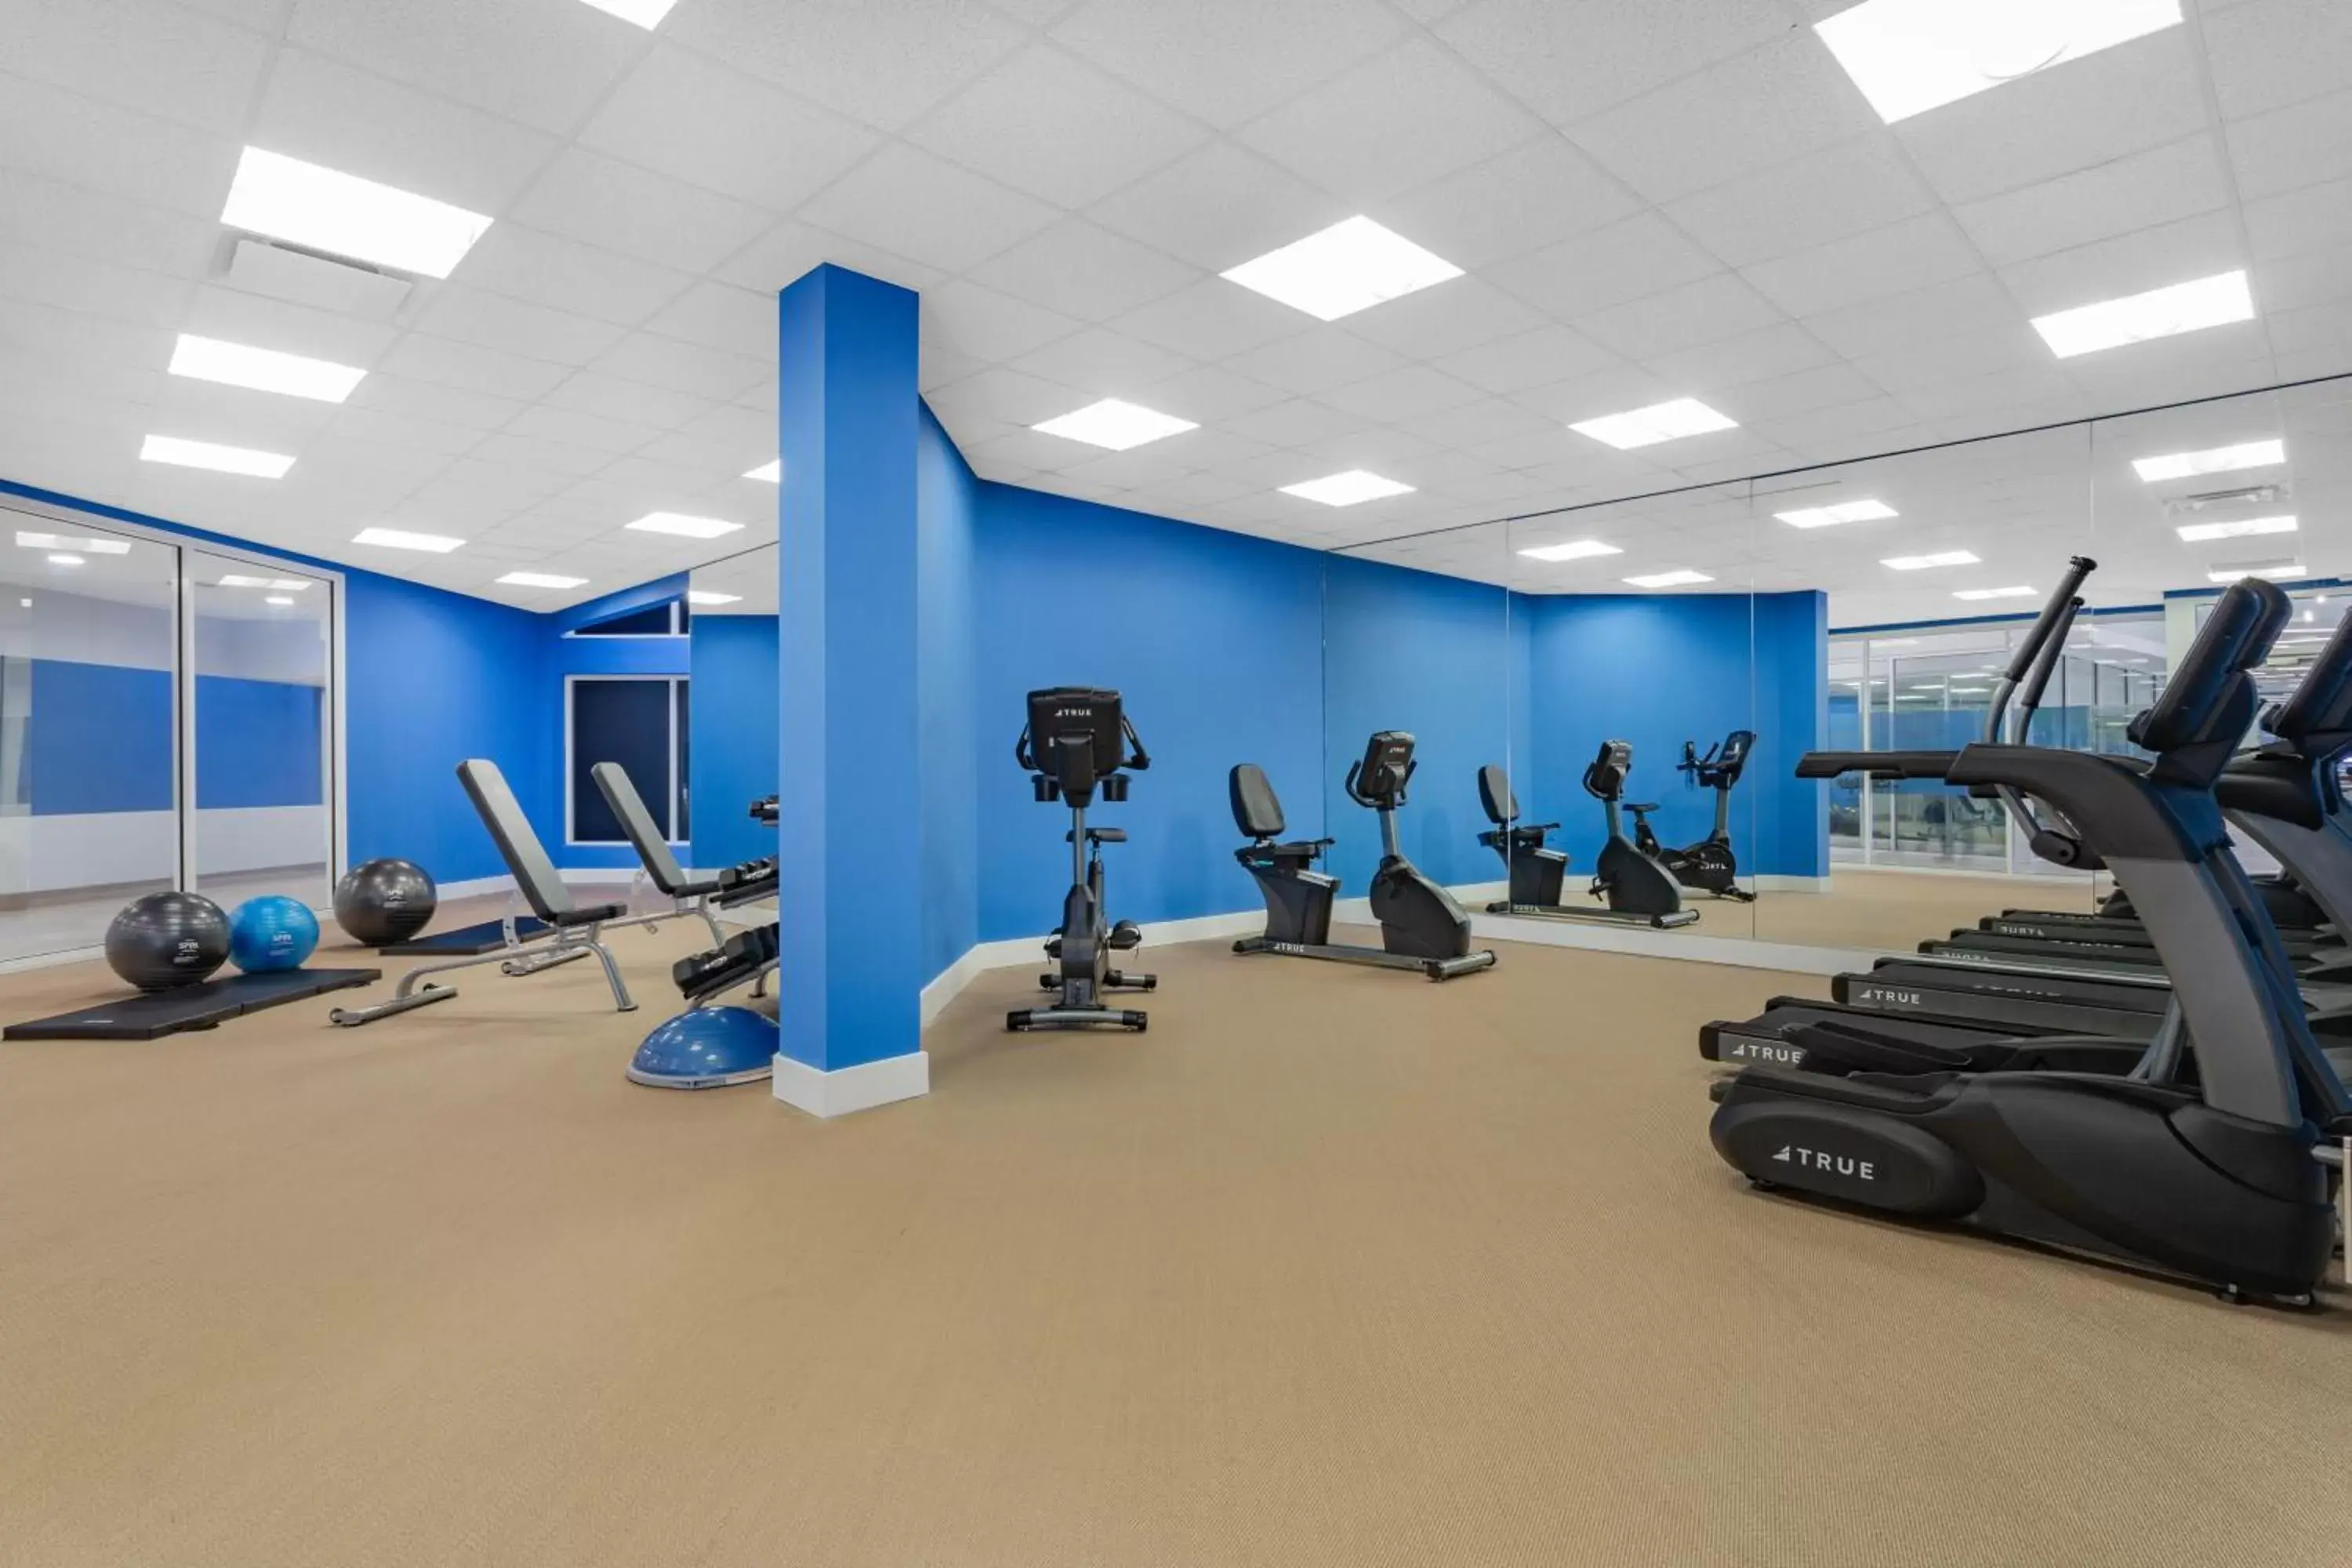 Fitness centre/facilities, Fitness Center/Facilities in Wyndham Orlando Resort & Conference Center, Celebration Area